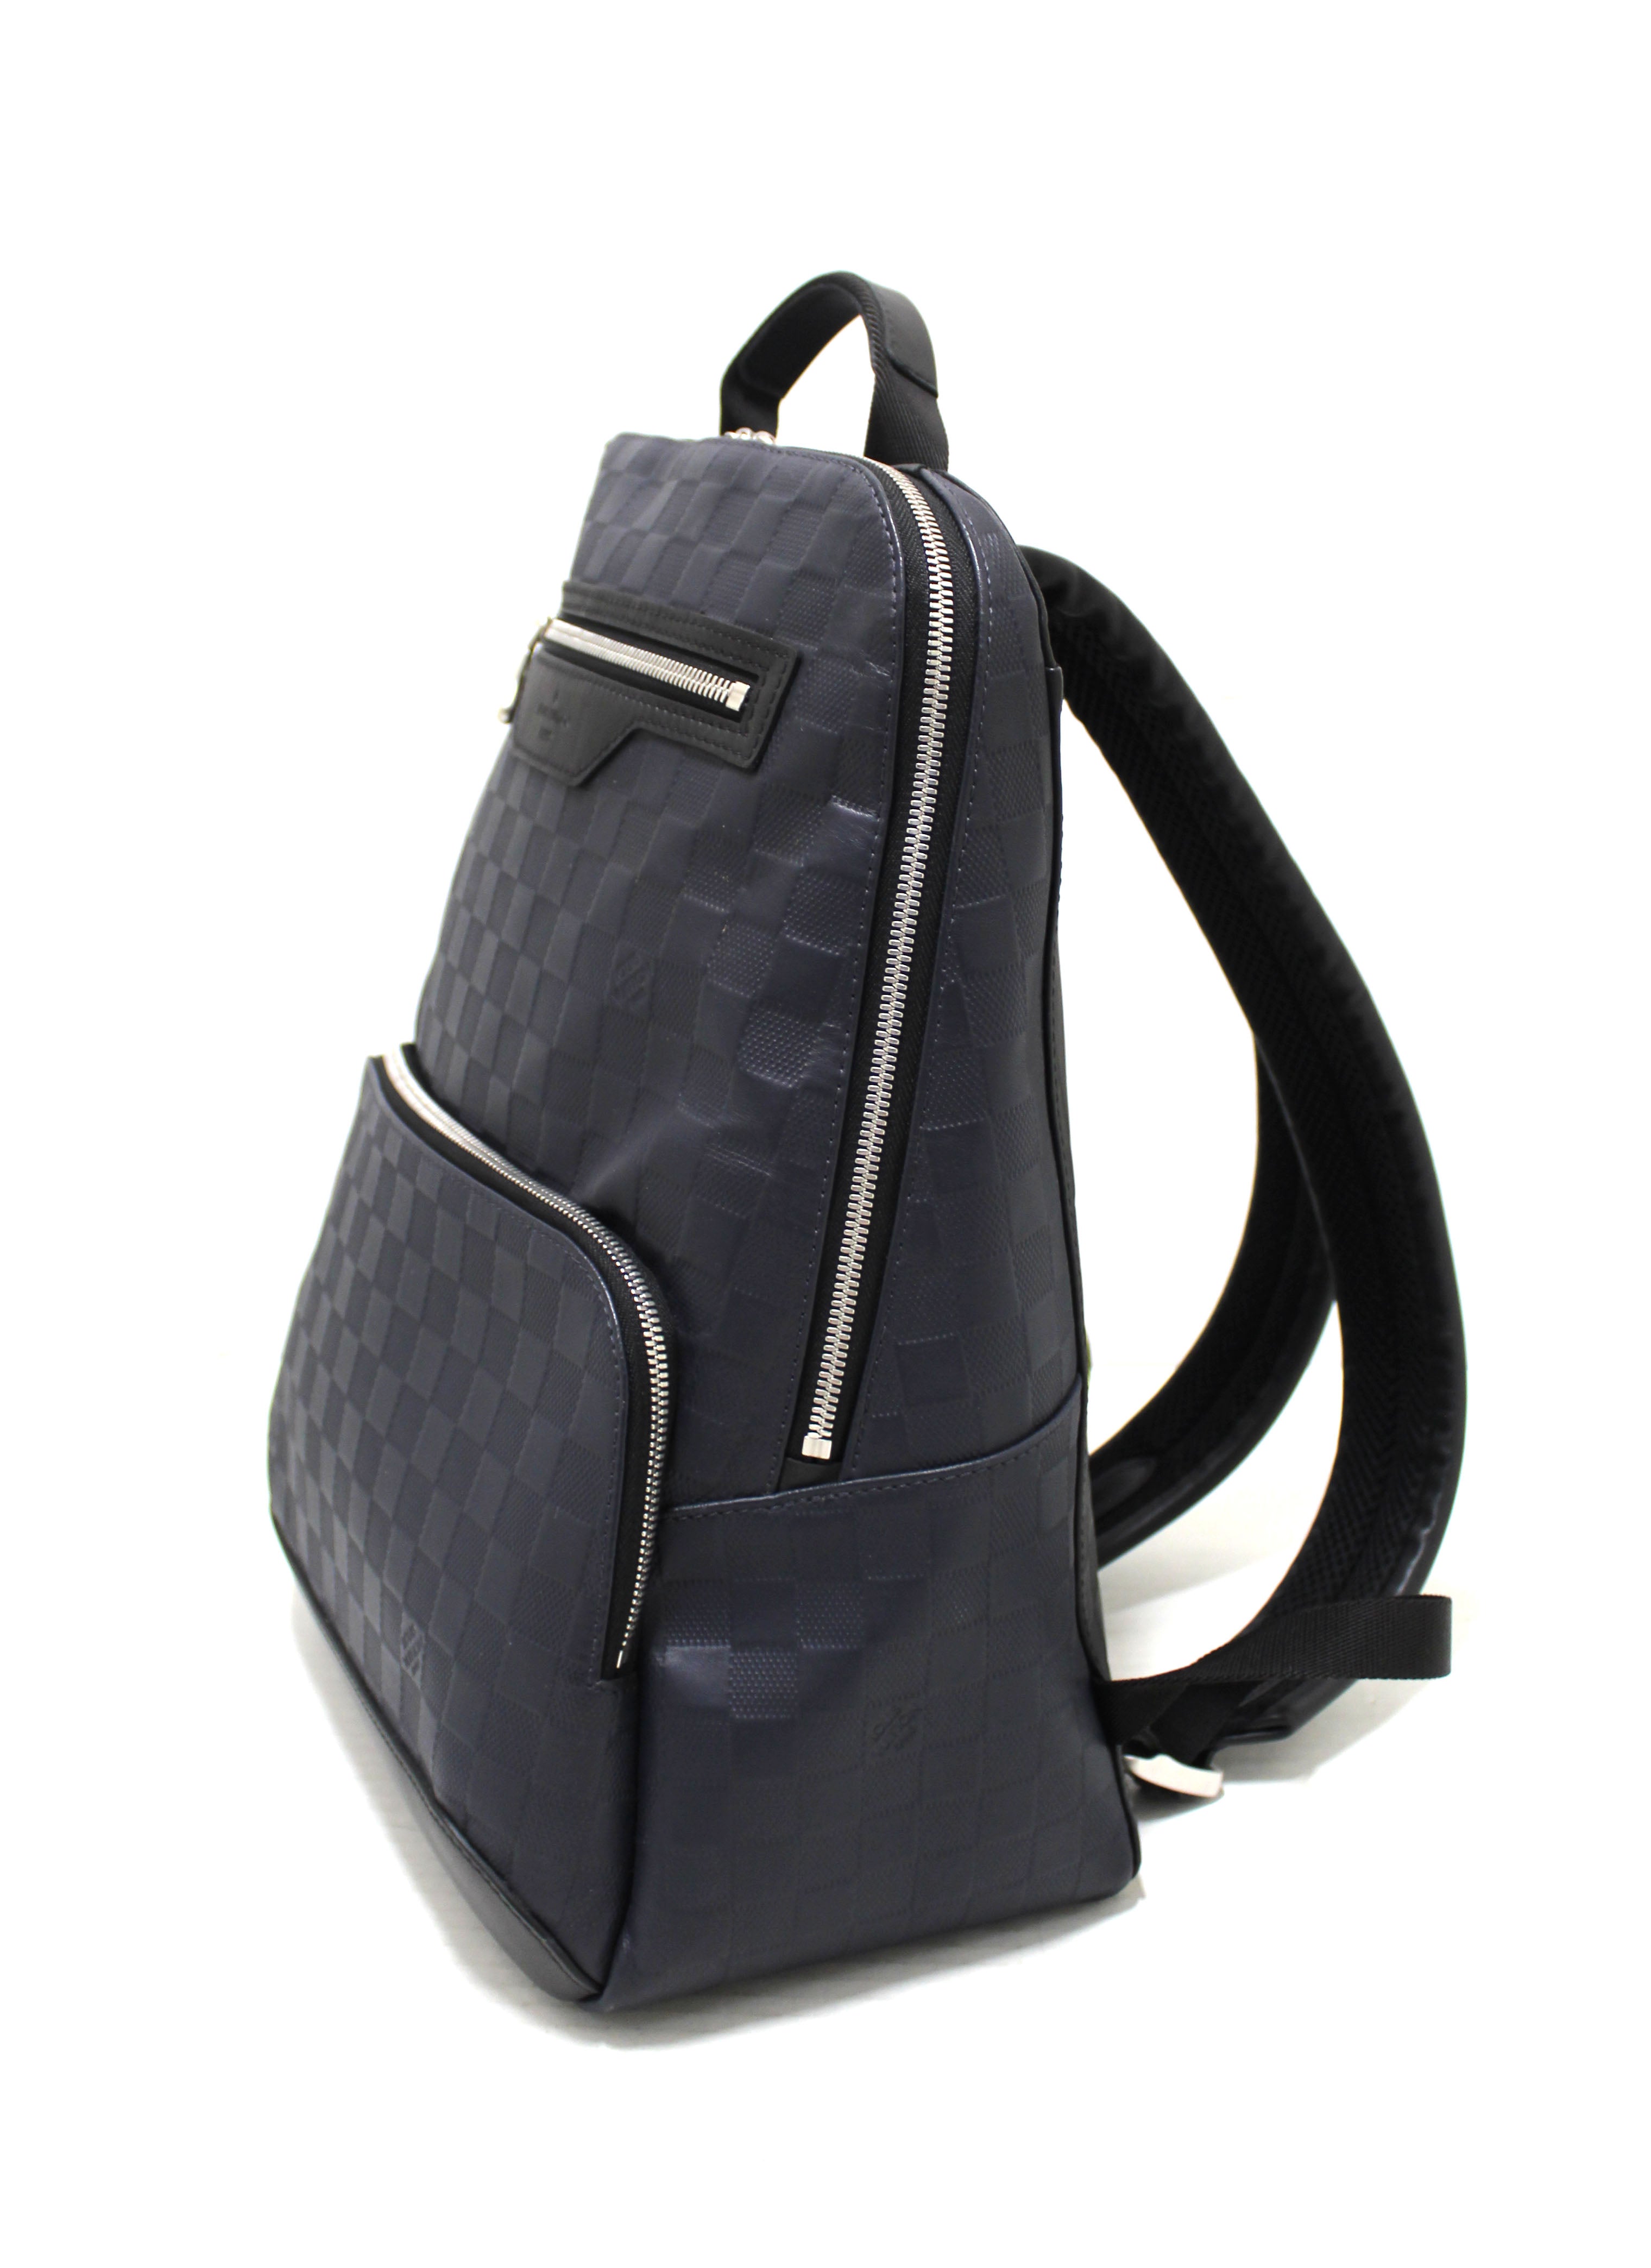 LOUIS VUITTON BLUE ASTRAL DAMIER INFINI CAMPUS BACKPACK (N40299